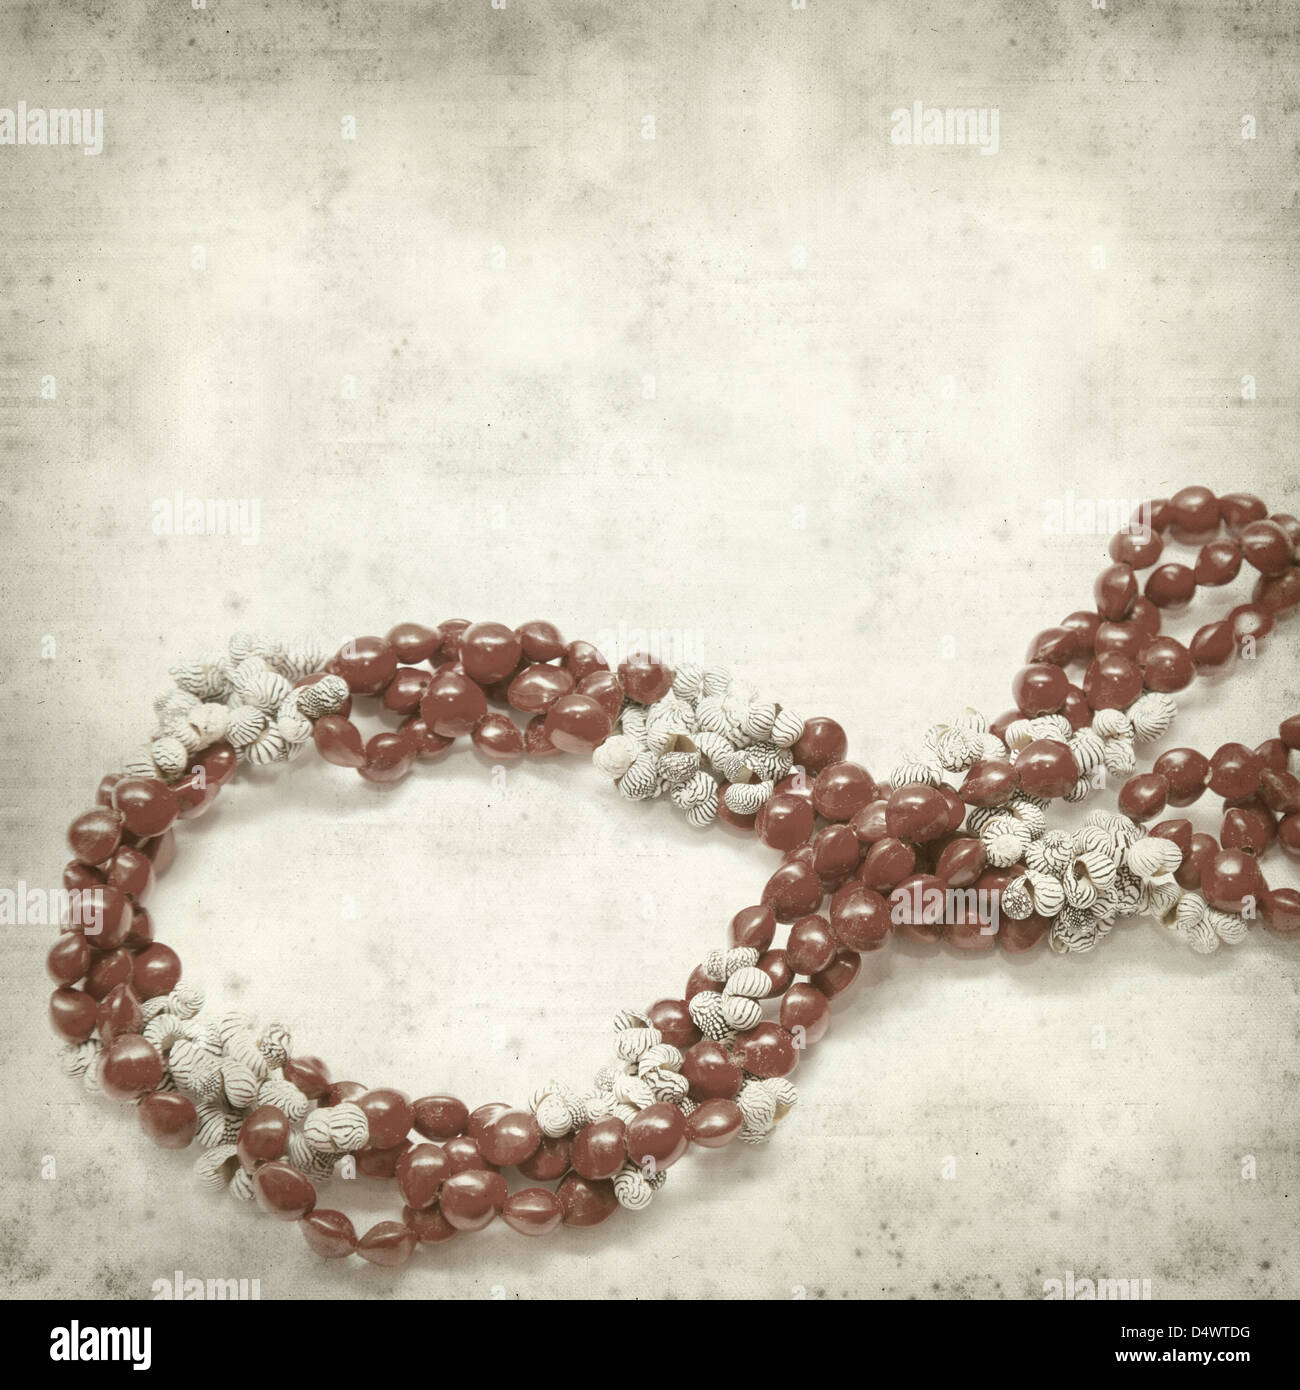 textured old paper background with necklace of seeds and shells Stock Photo